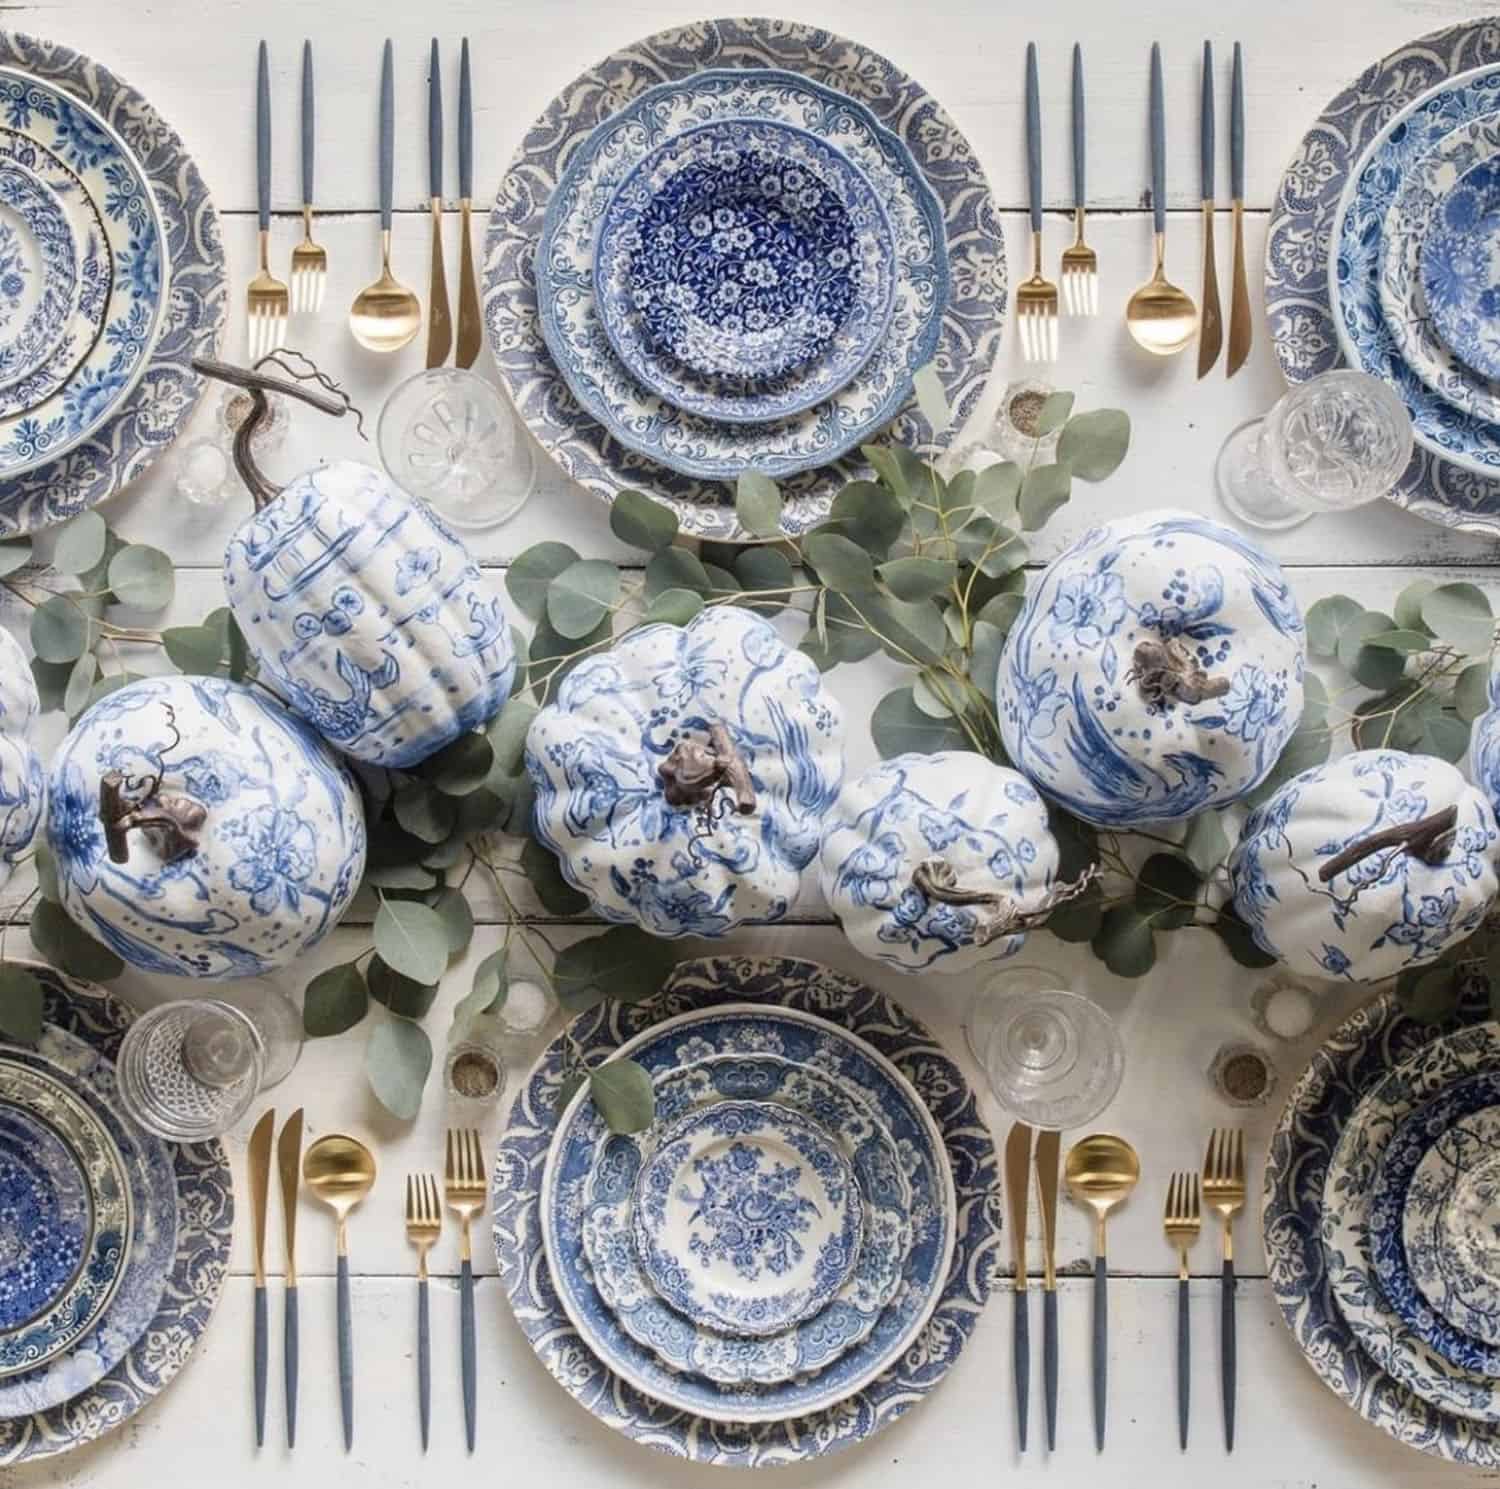 diy-thanksgiving-dining-table-with-a-blue-and-white-color-scheme